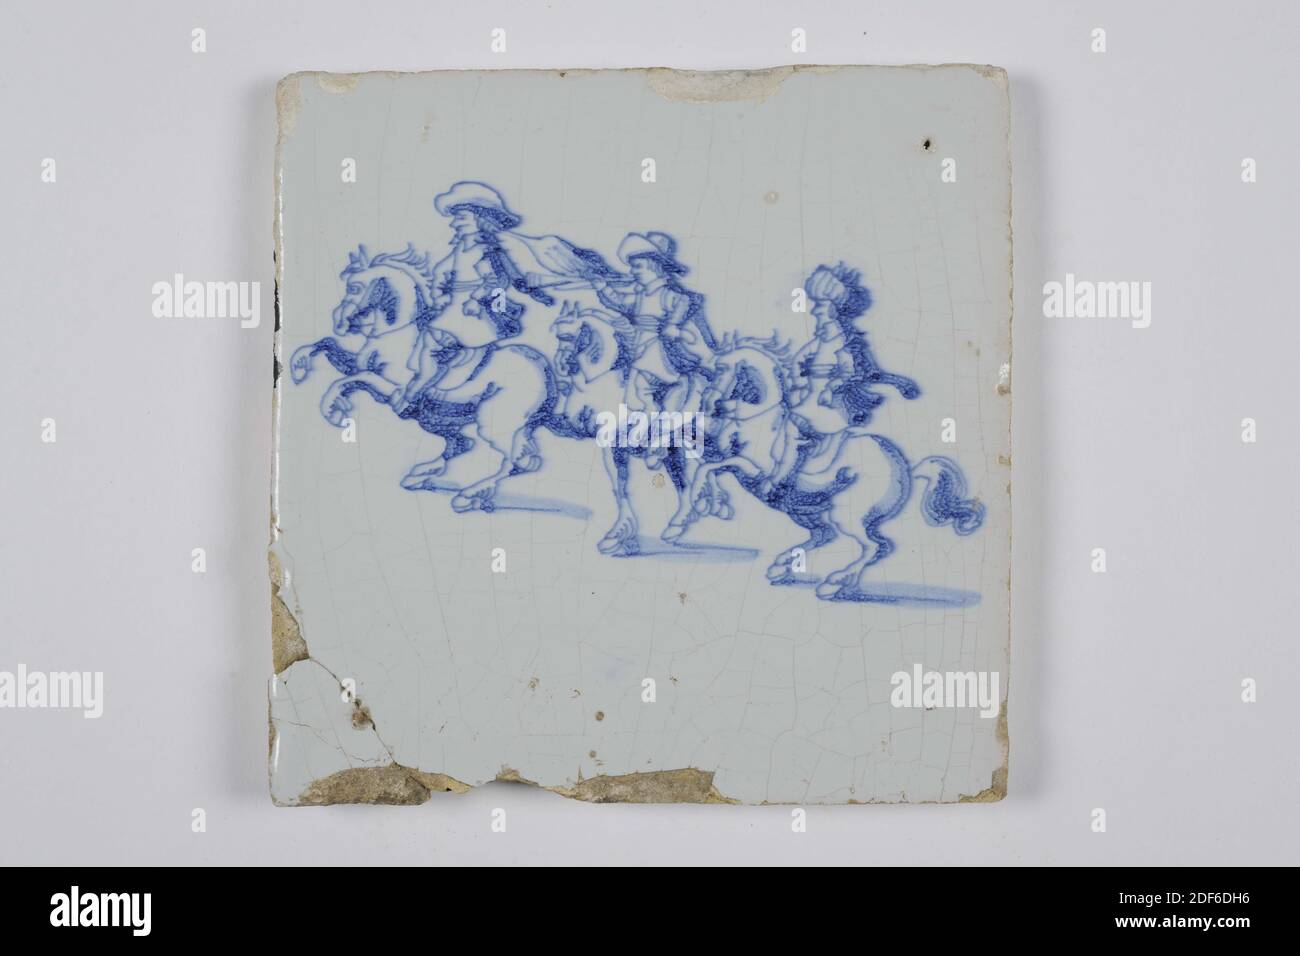 wall tile, Anonymous, 18th century, tin glaze, earthenware, General: 13 x 13 x 1cm (130 x 130 x 10mm), horse, rider, northern netherlands, Earthenware wall tile covered in tin glaze painted in blue. On the tile, three horse riders are depicted on prancing horses. The riders wear hats and the middle rider blows a horn, 1985 Stock Photo